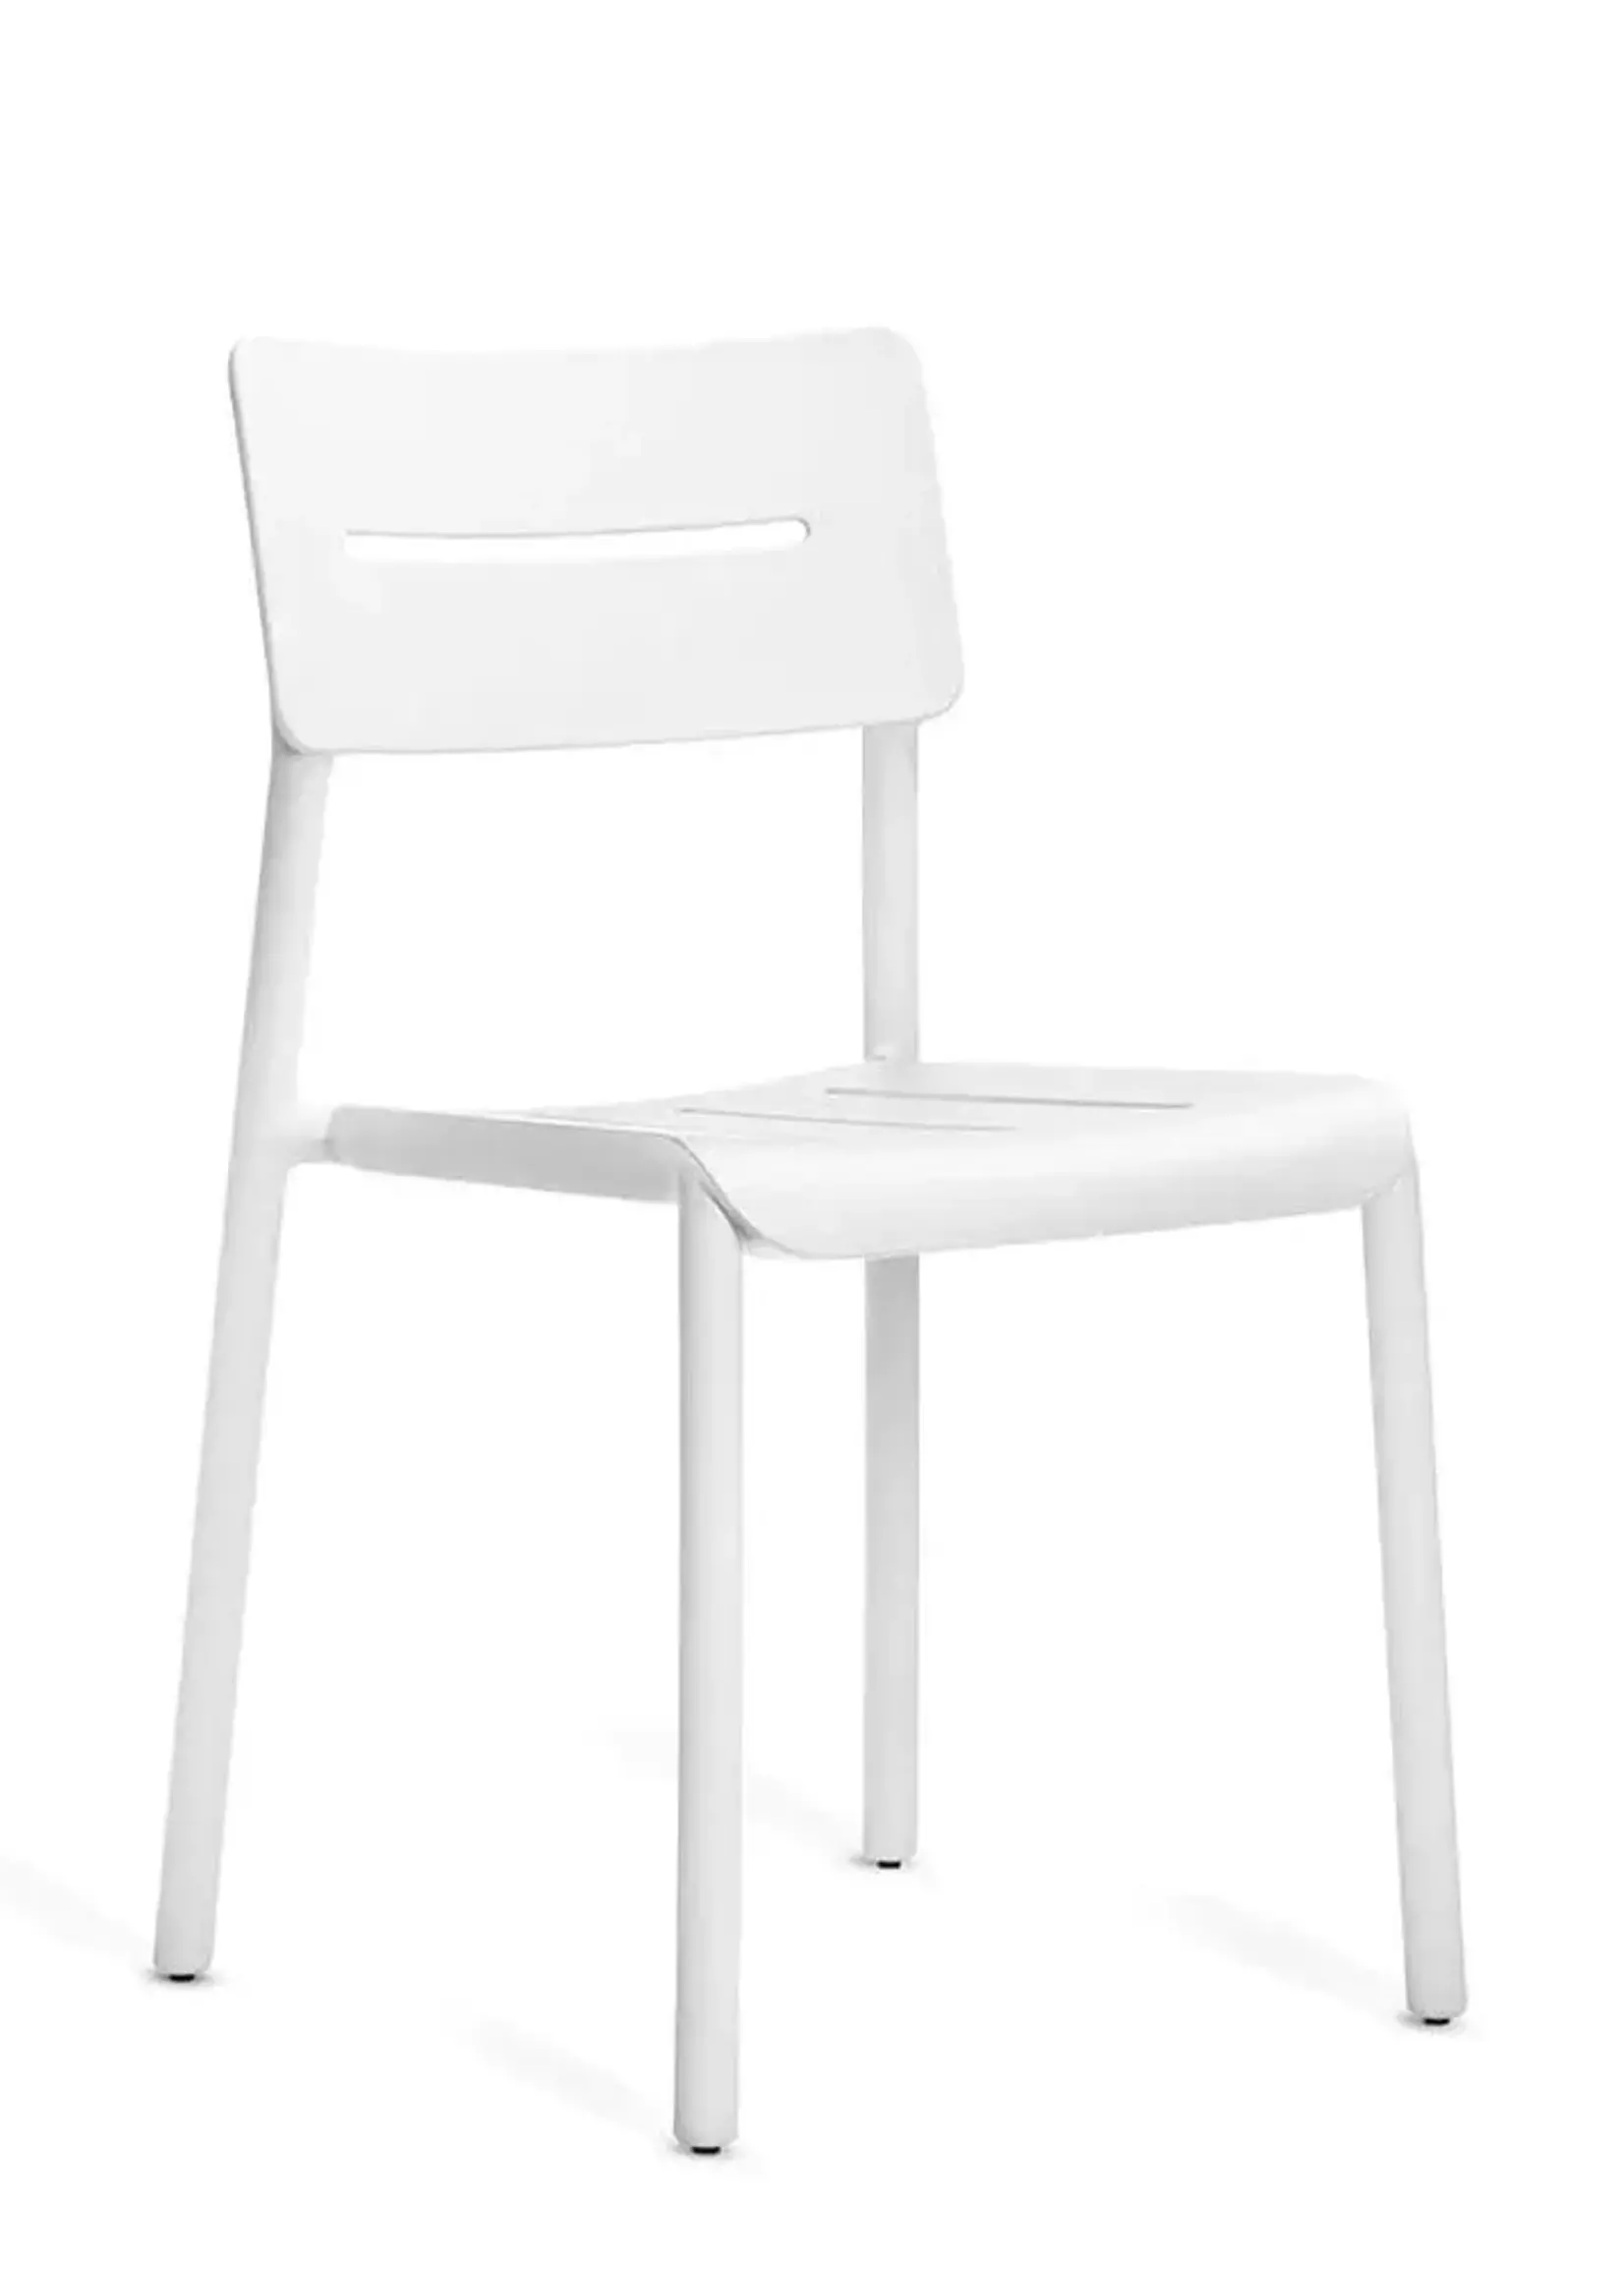 TOOU Chair OUTO (Choose Color)